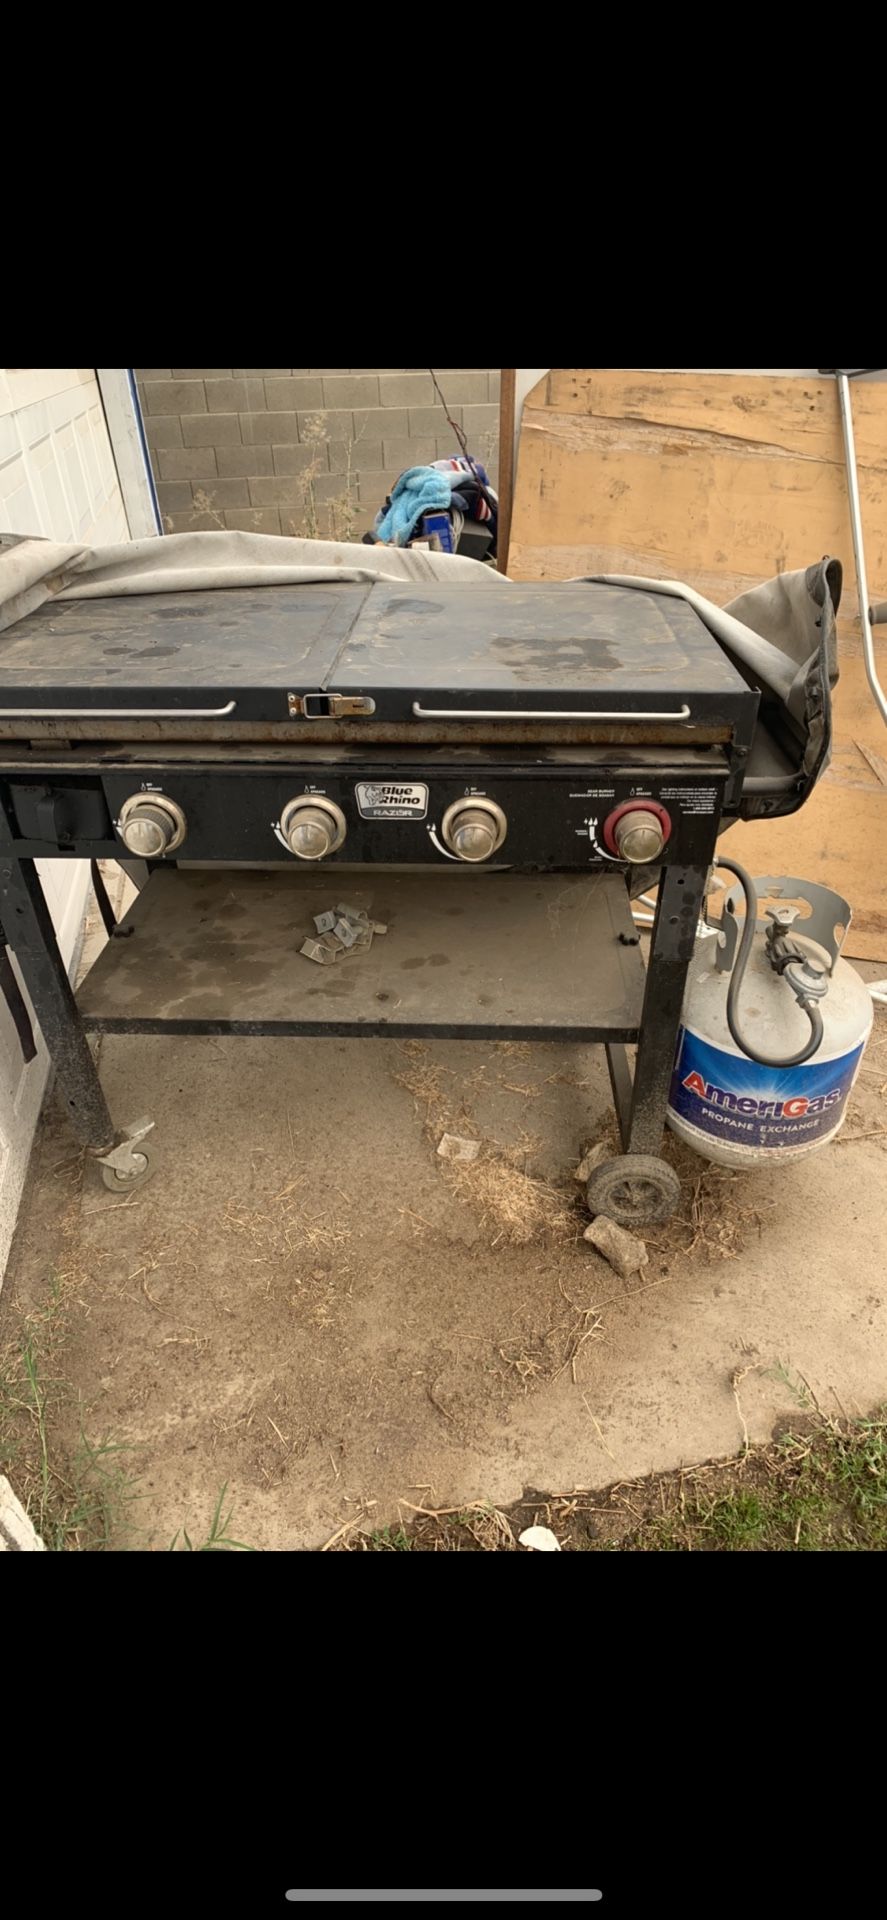 Blue rhino griddle with gas tank $250 firm cash